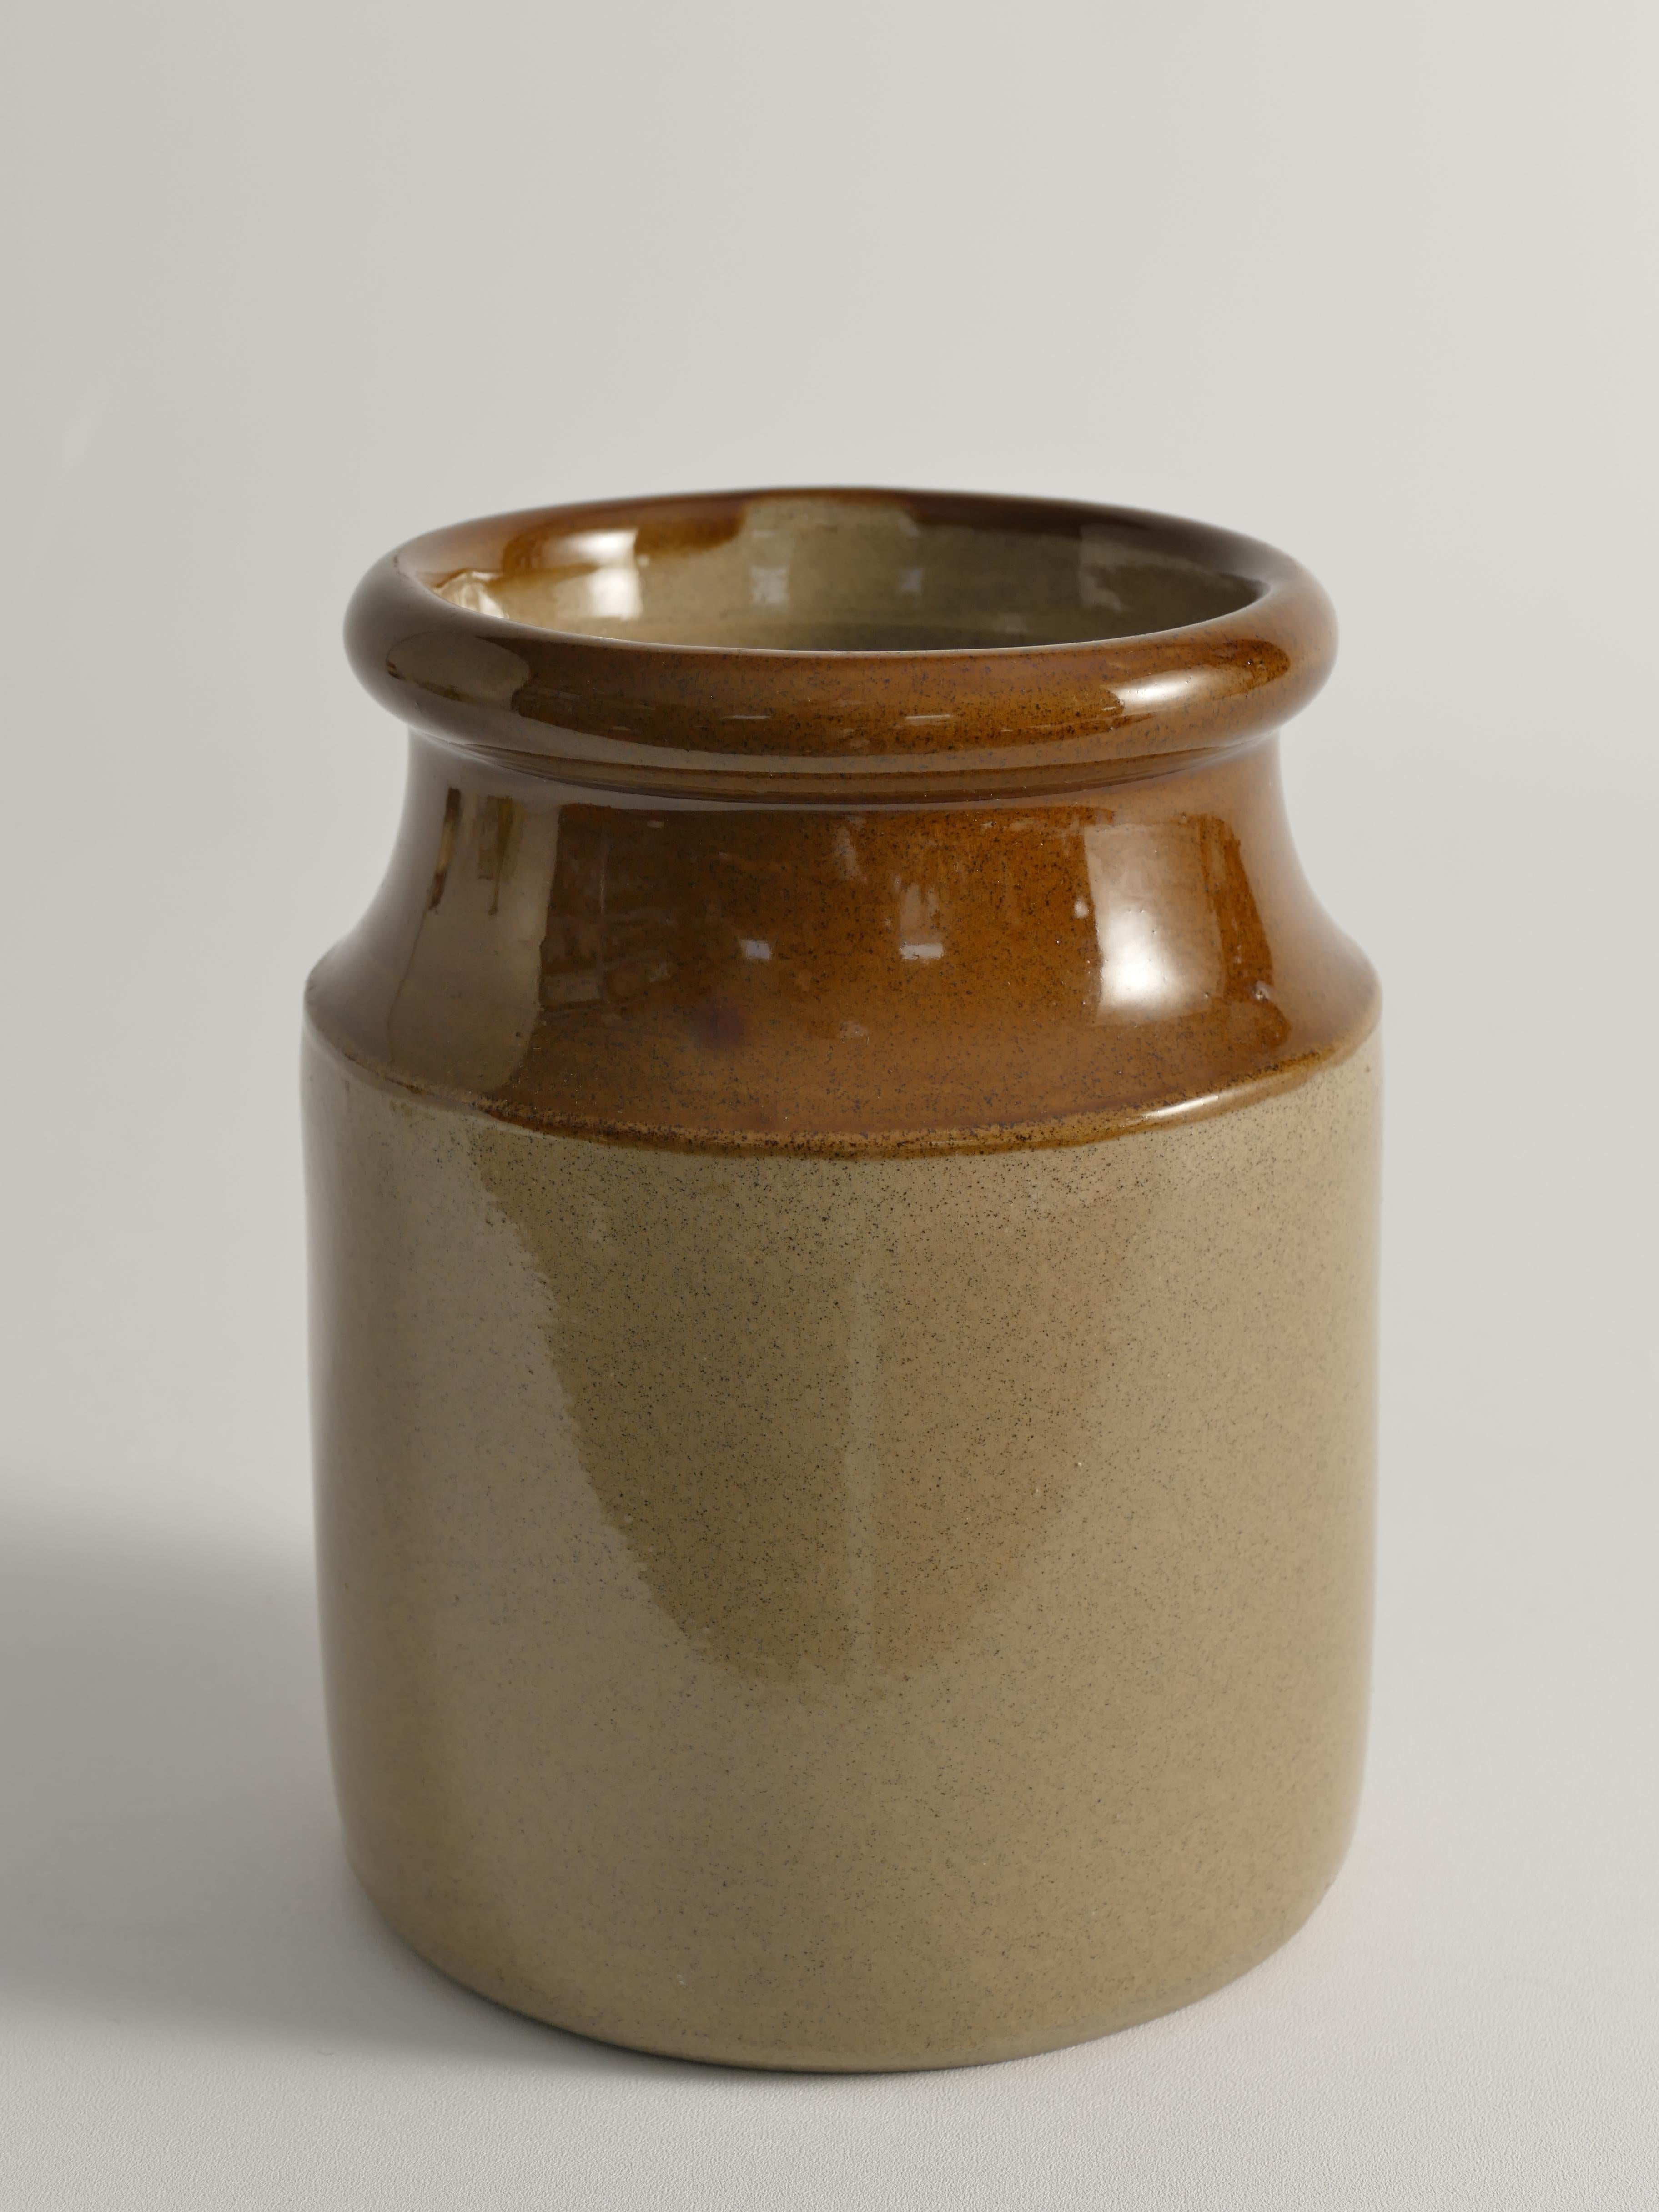 This two-tone Moira stoneware jar from England combines classic style with practical function. Featuring a traditional English design, it showcases earthy neutral tones that complement any decor. 

The jar's two-toned caramel and sand color glaze